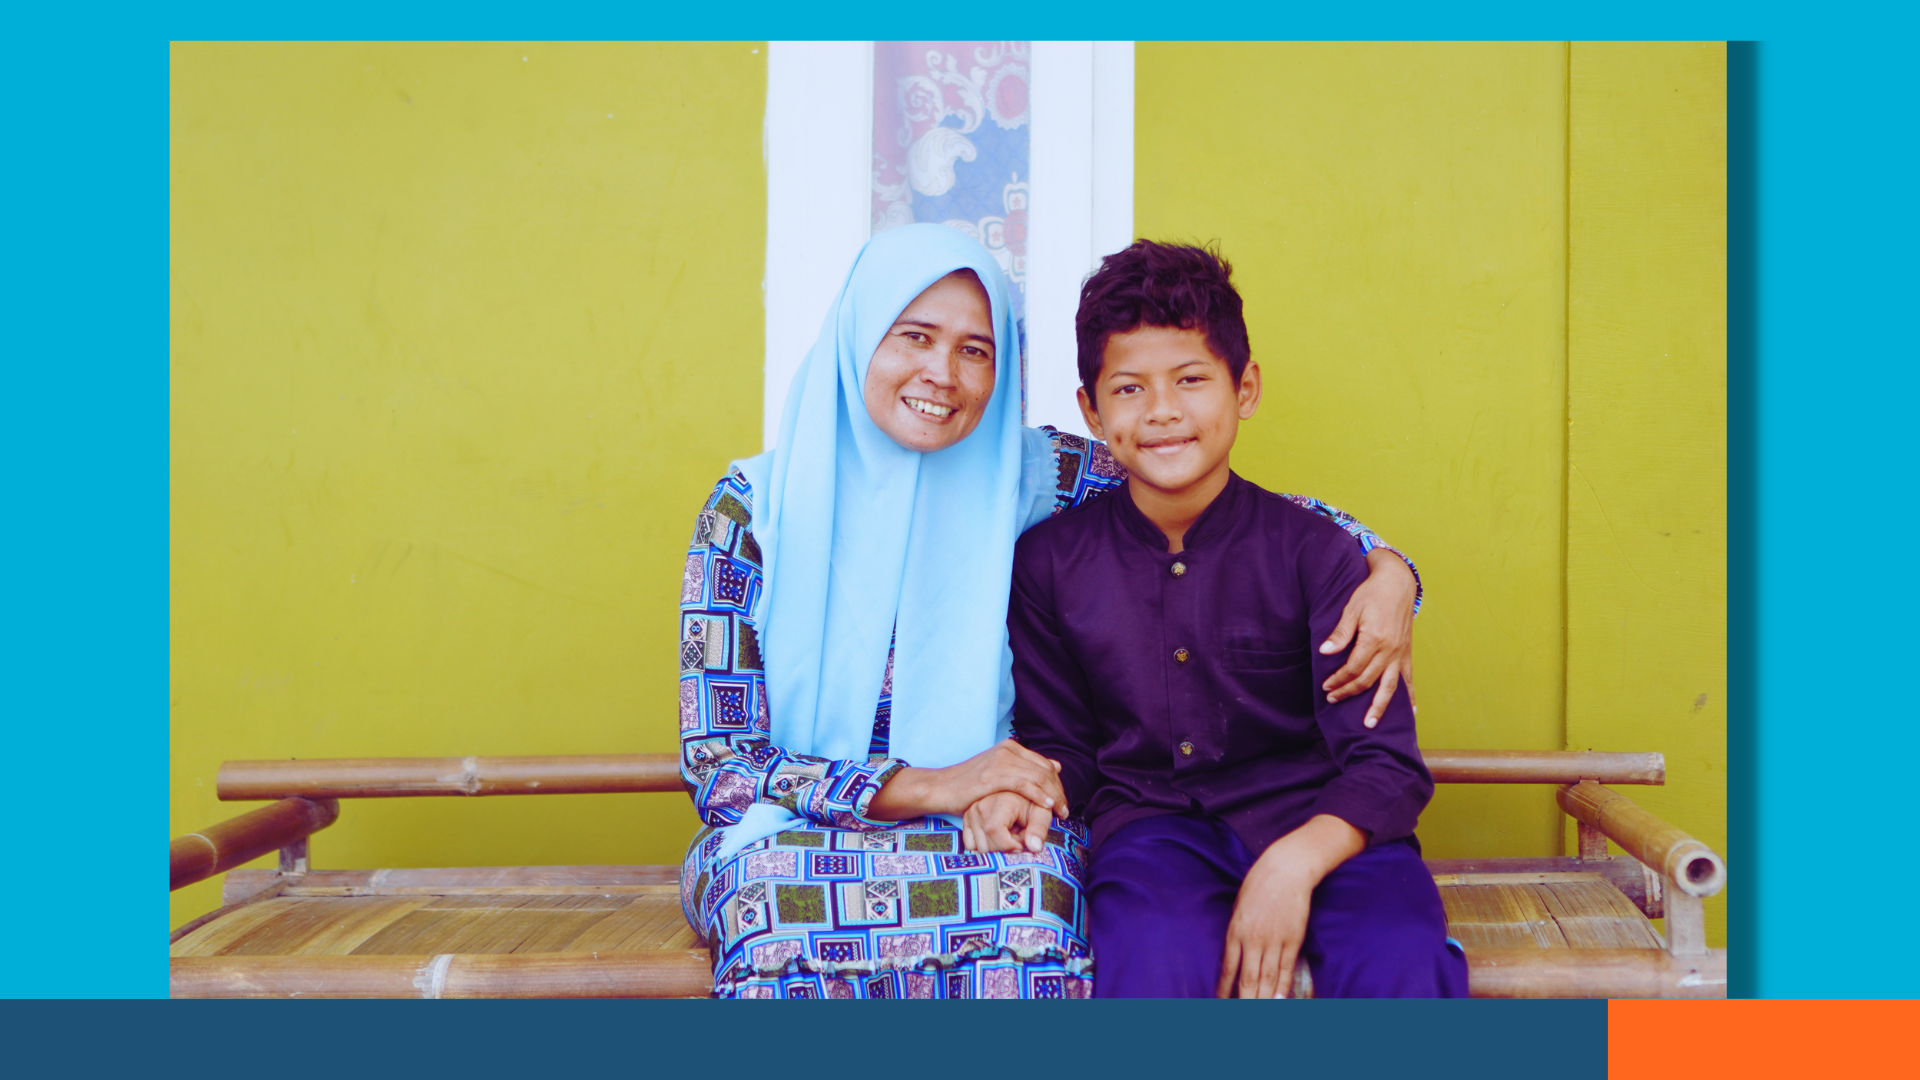 <strong>Habitat Indonesia Made Ms. Tisha’s Dream to Have a Decent House Come True</strong>